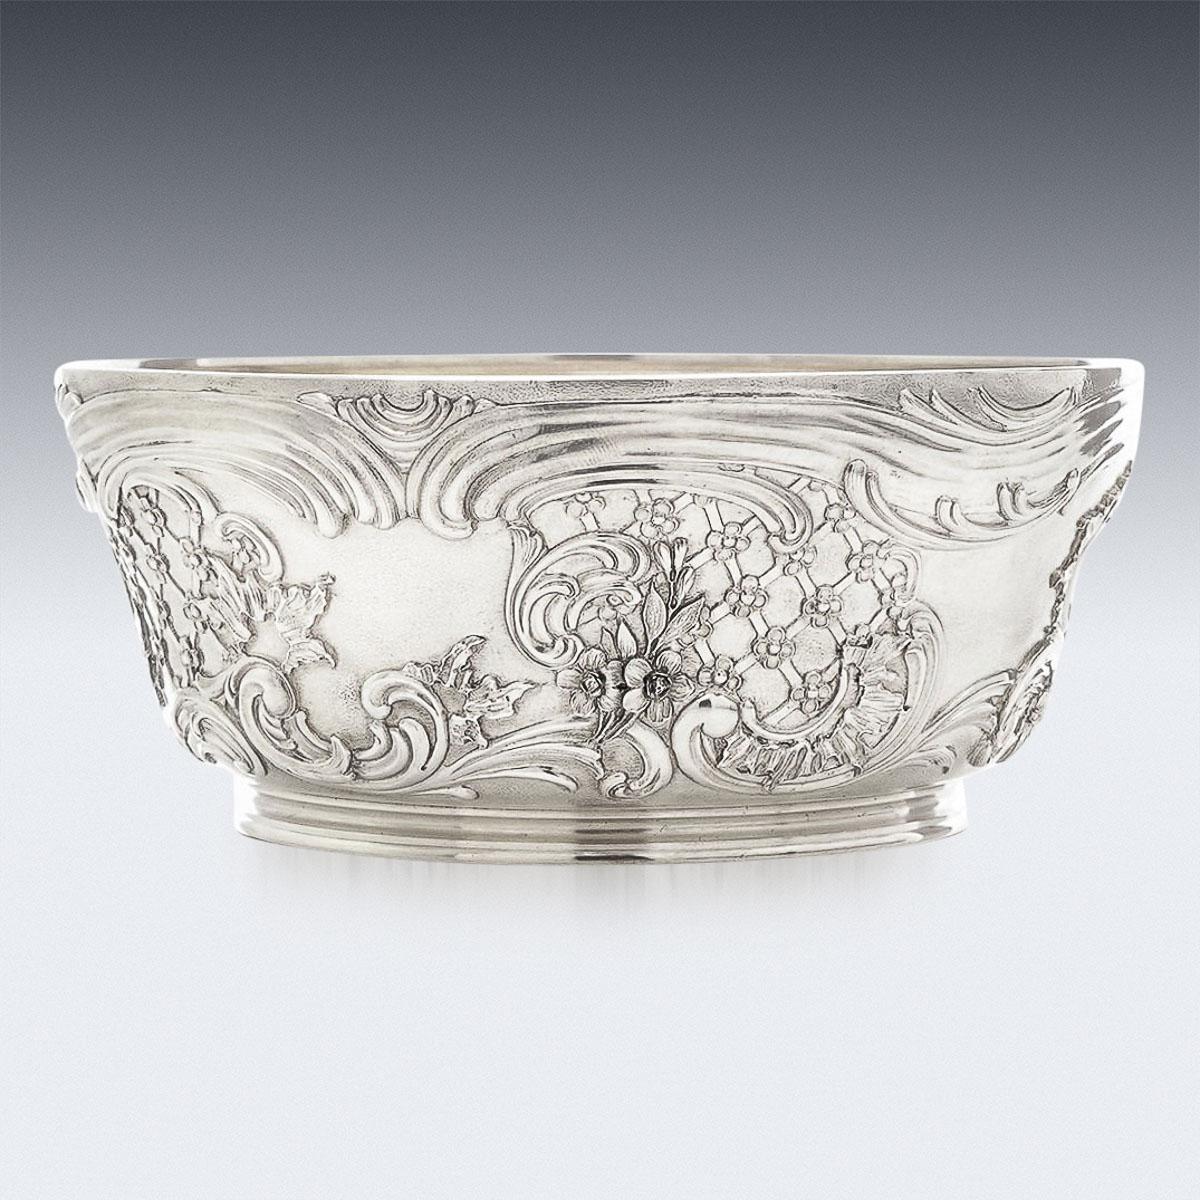 19th Century Imperial Russian silver presentation bowl in the Rococo style decorated with gilding and embossing with the inscription “From the Czar of Russia to Sir Myles Fenton 1894” engraved in the cartouche (“from the Russian Tsar to Sir Michael